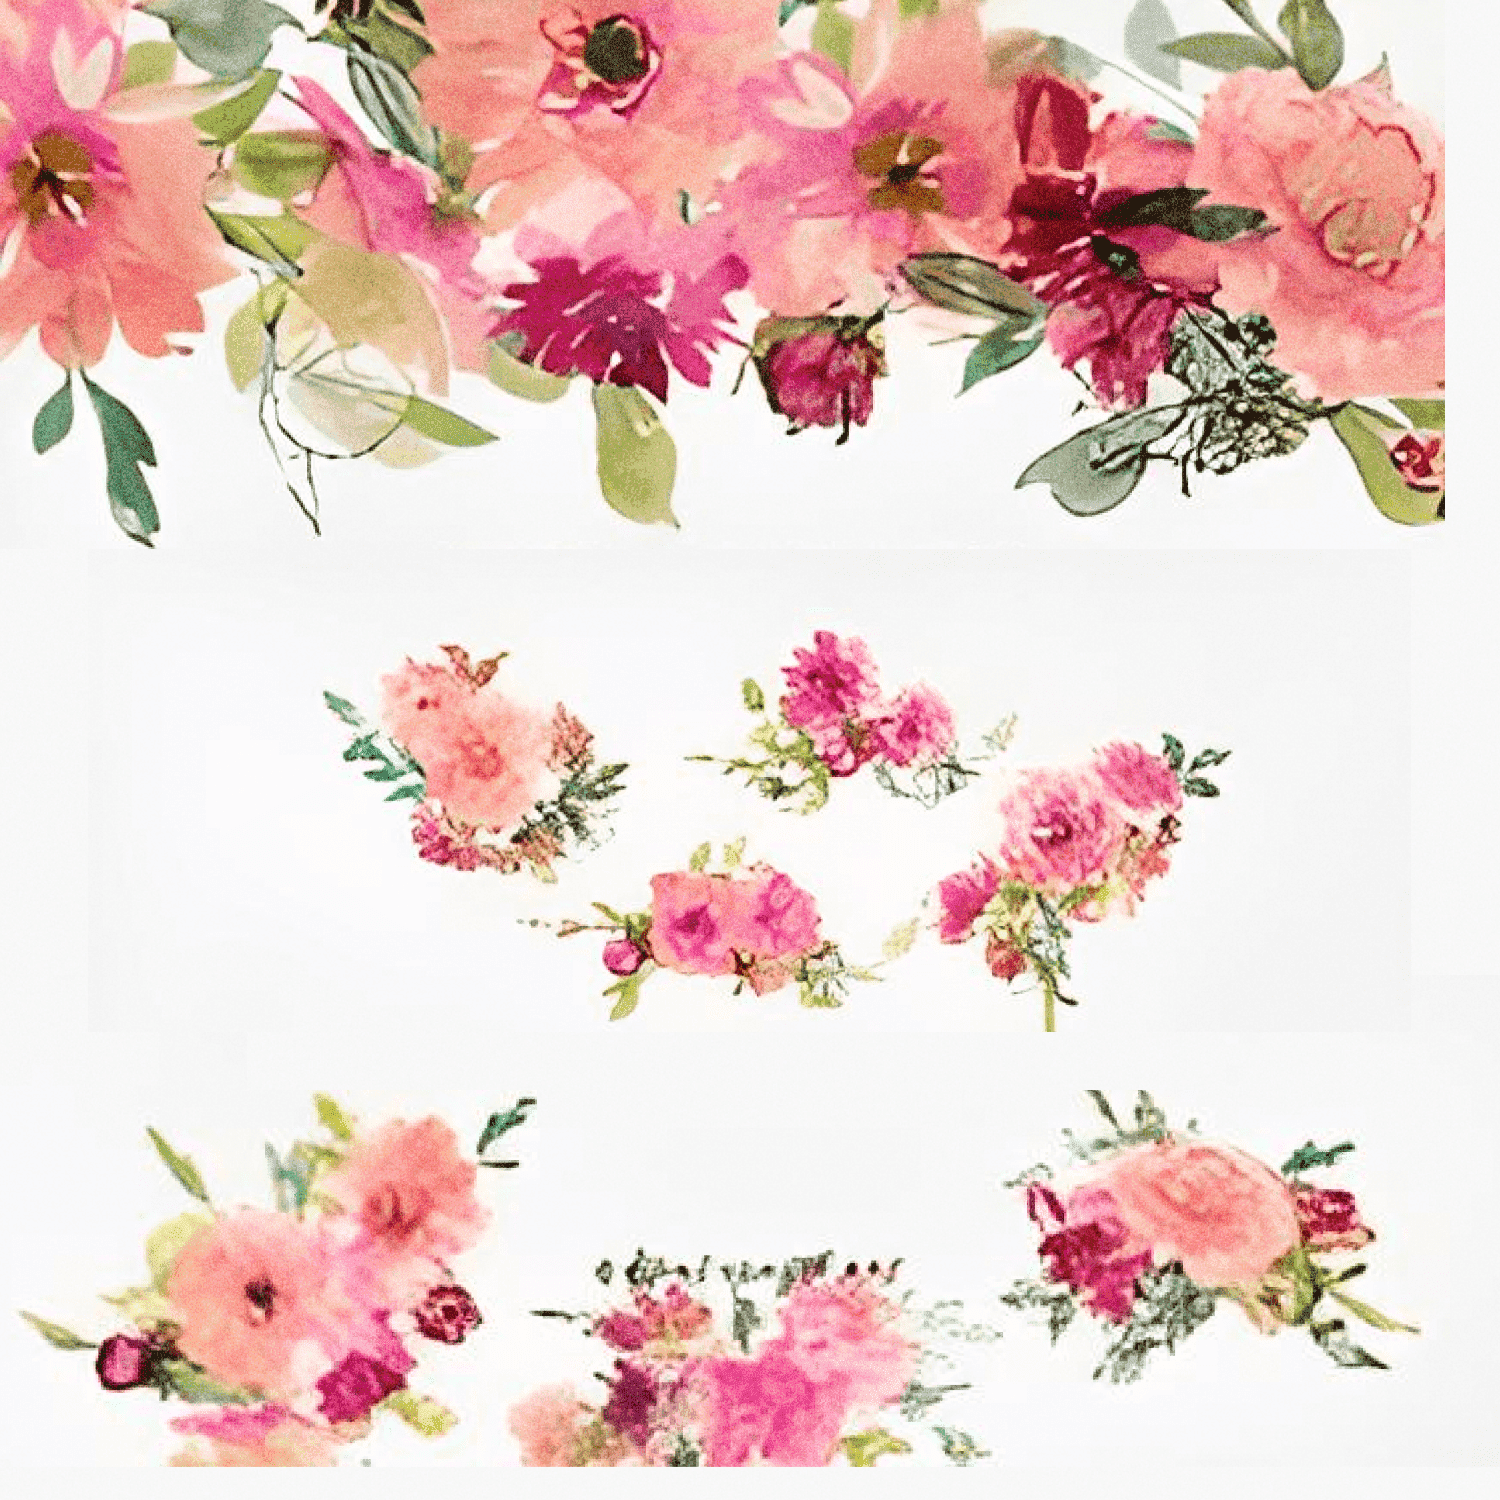 Watercolor Pink Dahlia Set - "Flowers On Background".